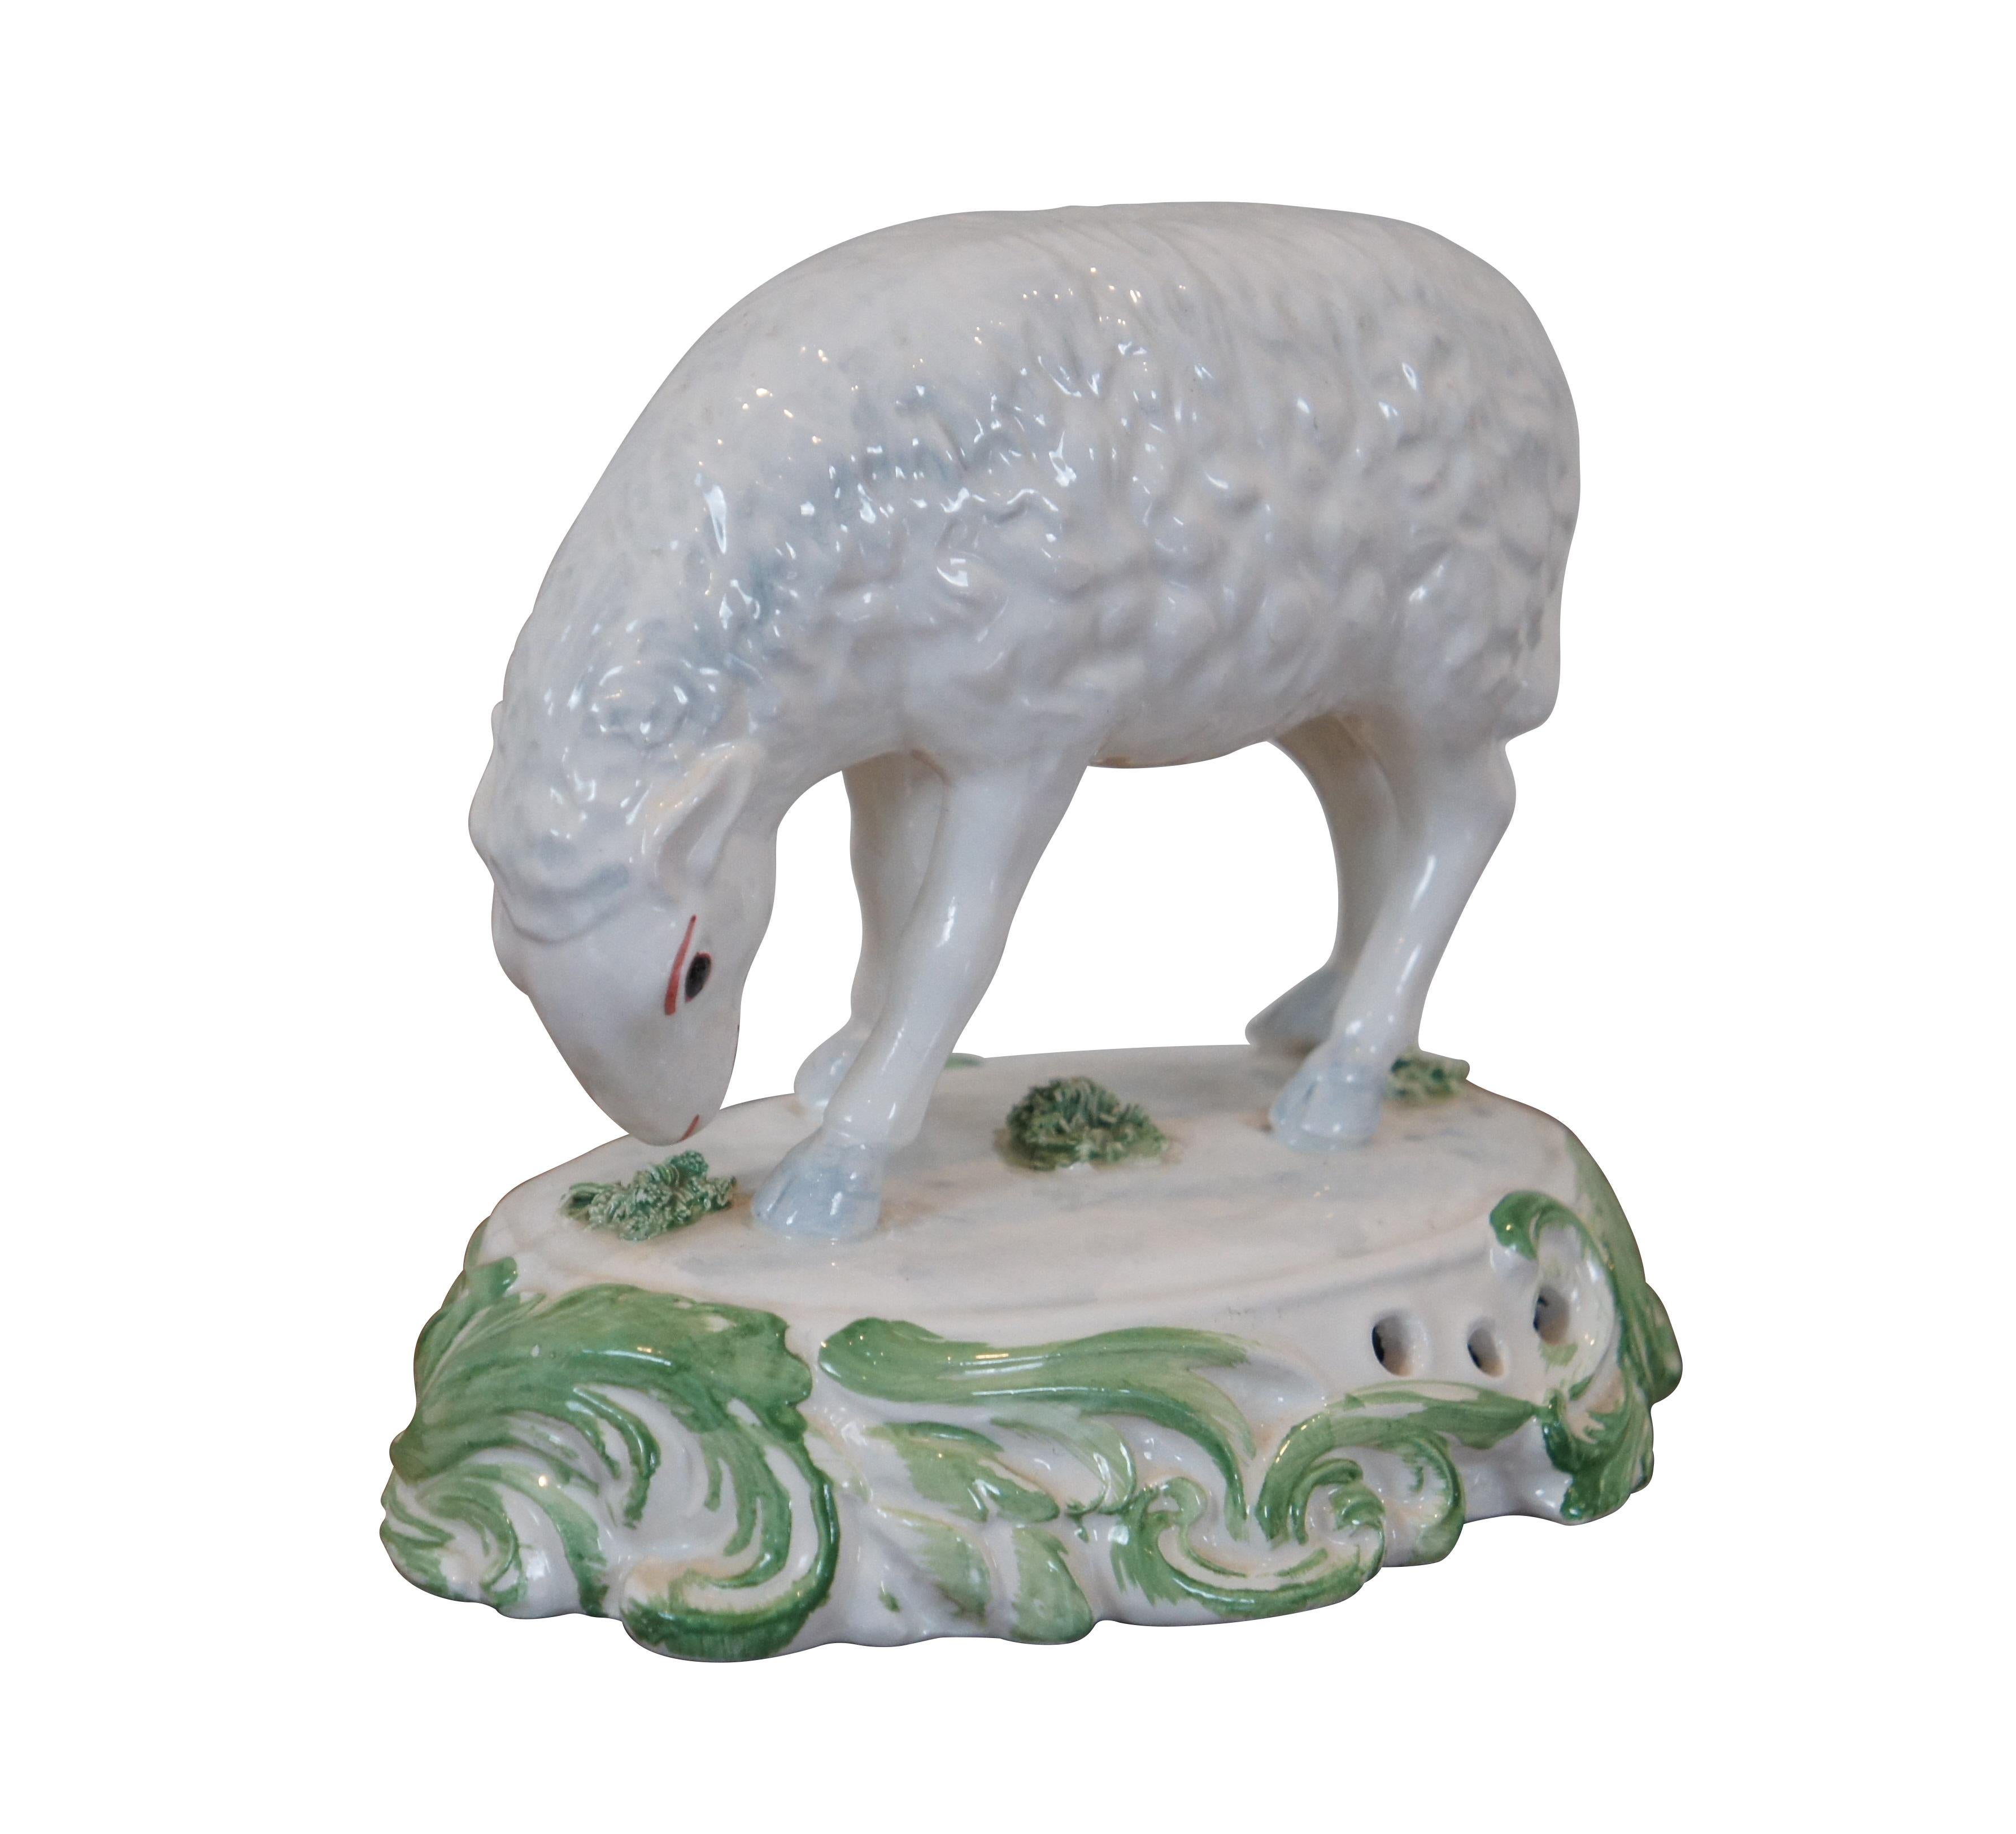 Vintage Chelsea House Port Royal hand painted porcelain figurine in the shape of a sheep / lamb grazing in a field. White with green foliate details. In the style of 19th century Staffordshire figurines. Made in Italy.

Dimensions:
6.75” x 4.75” x